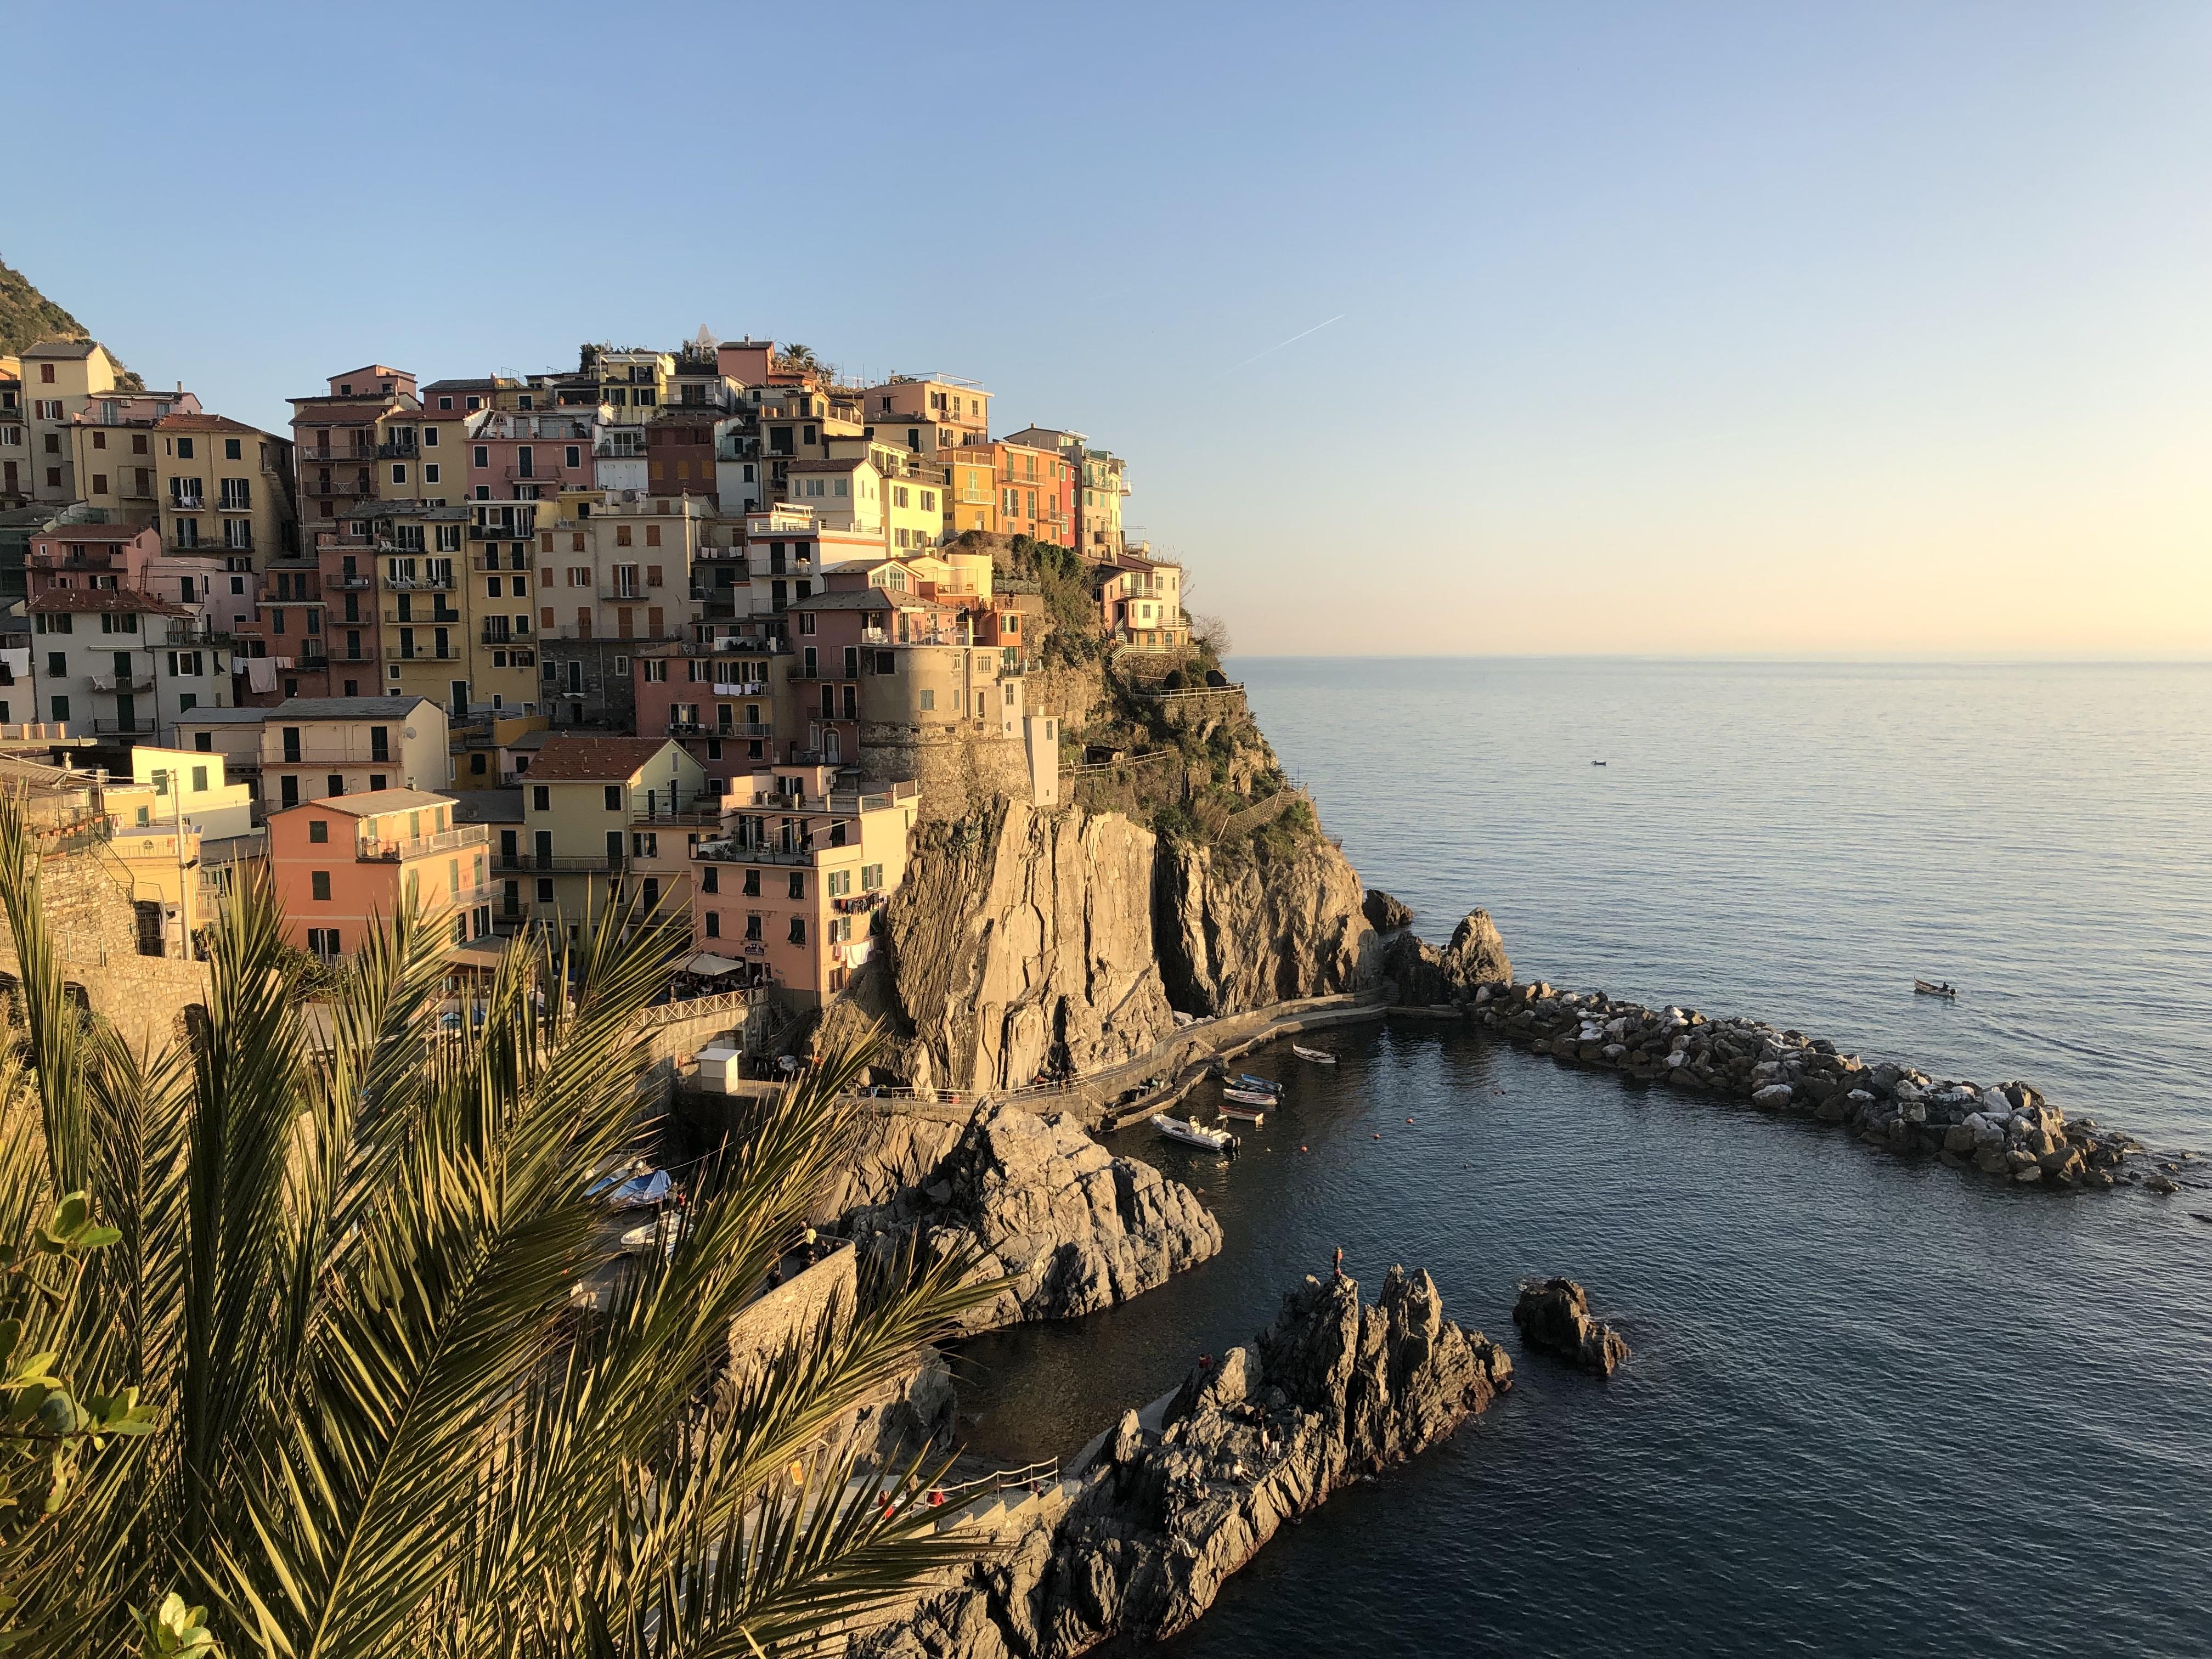 Watched the sunset in Manarola, Cinque Terre, Italy last week